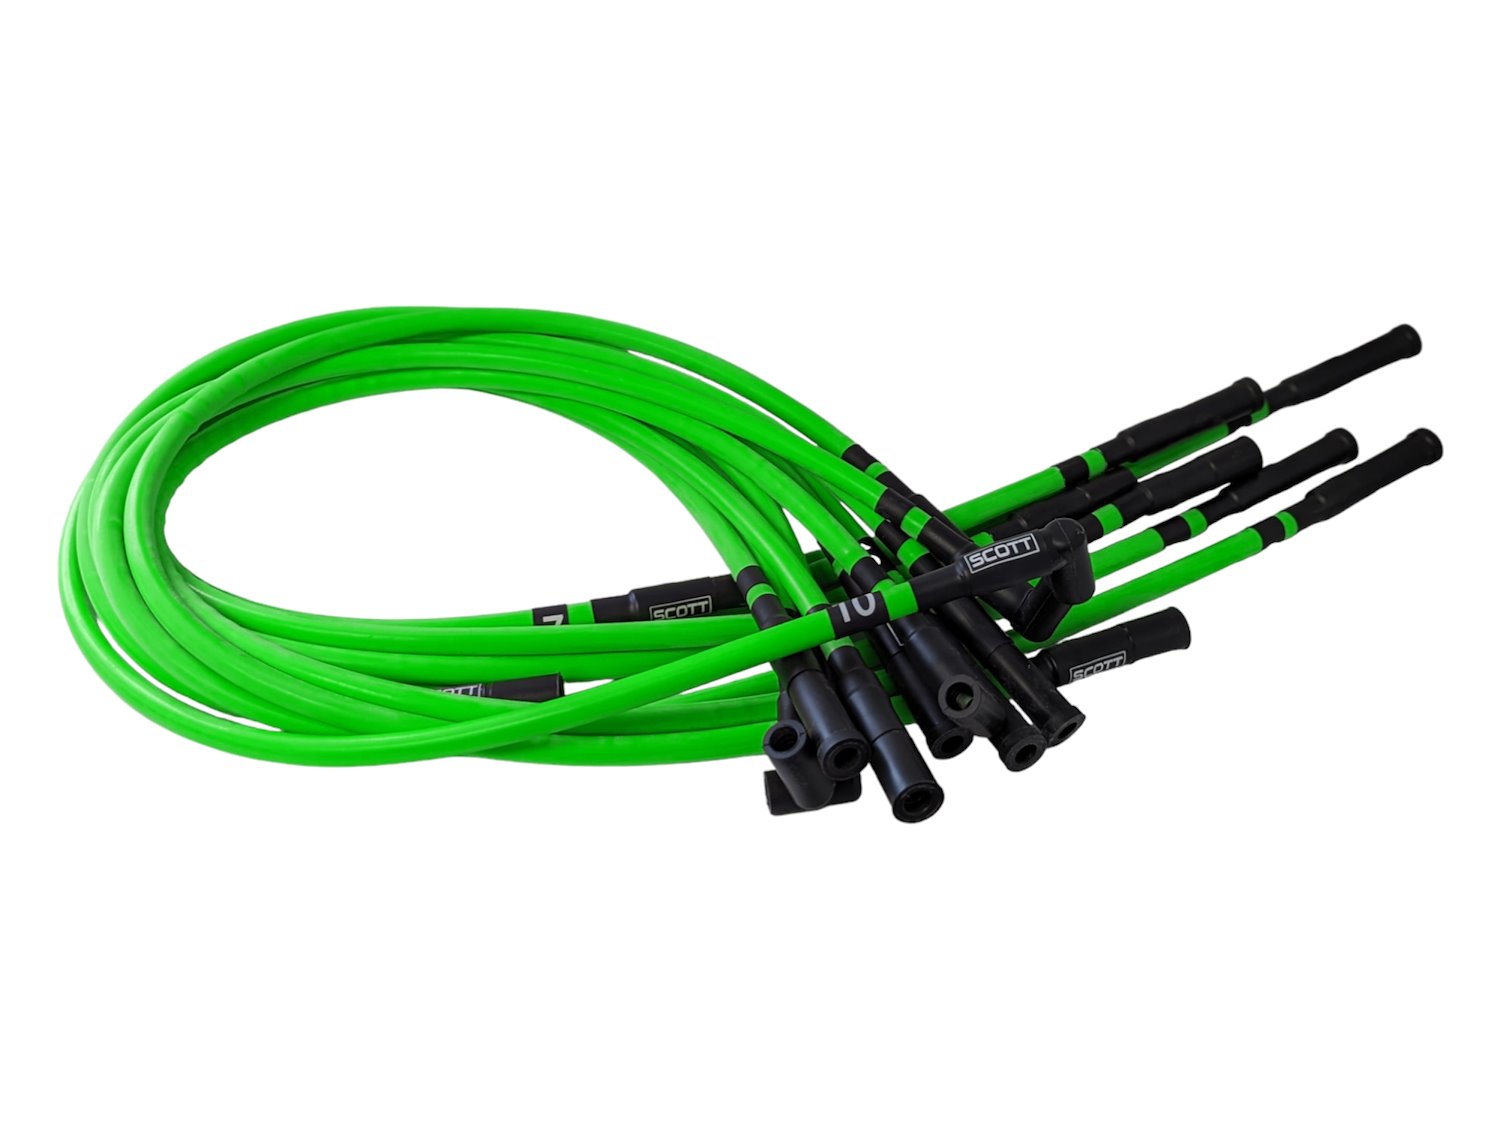 SPW-CH-690-II-8 High-Performance Silicone-Sleeved Spark Plug Wire Set for Dodge Viper (Gen-2) [Fluorescent Green]